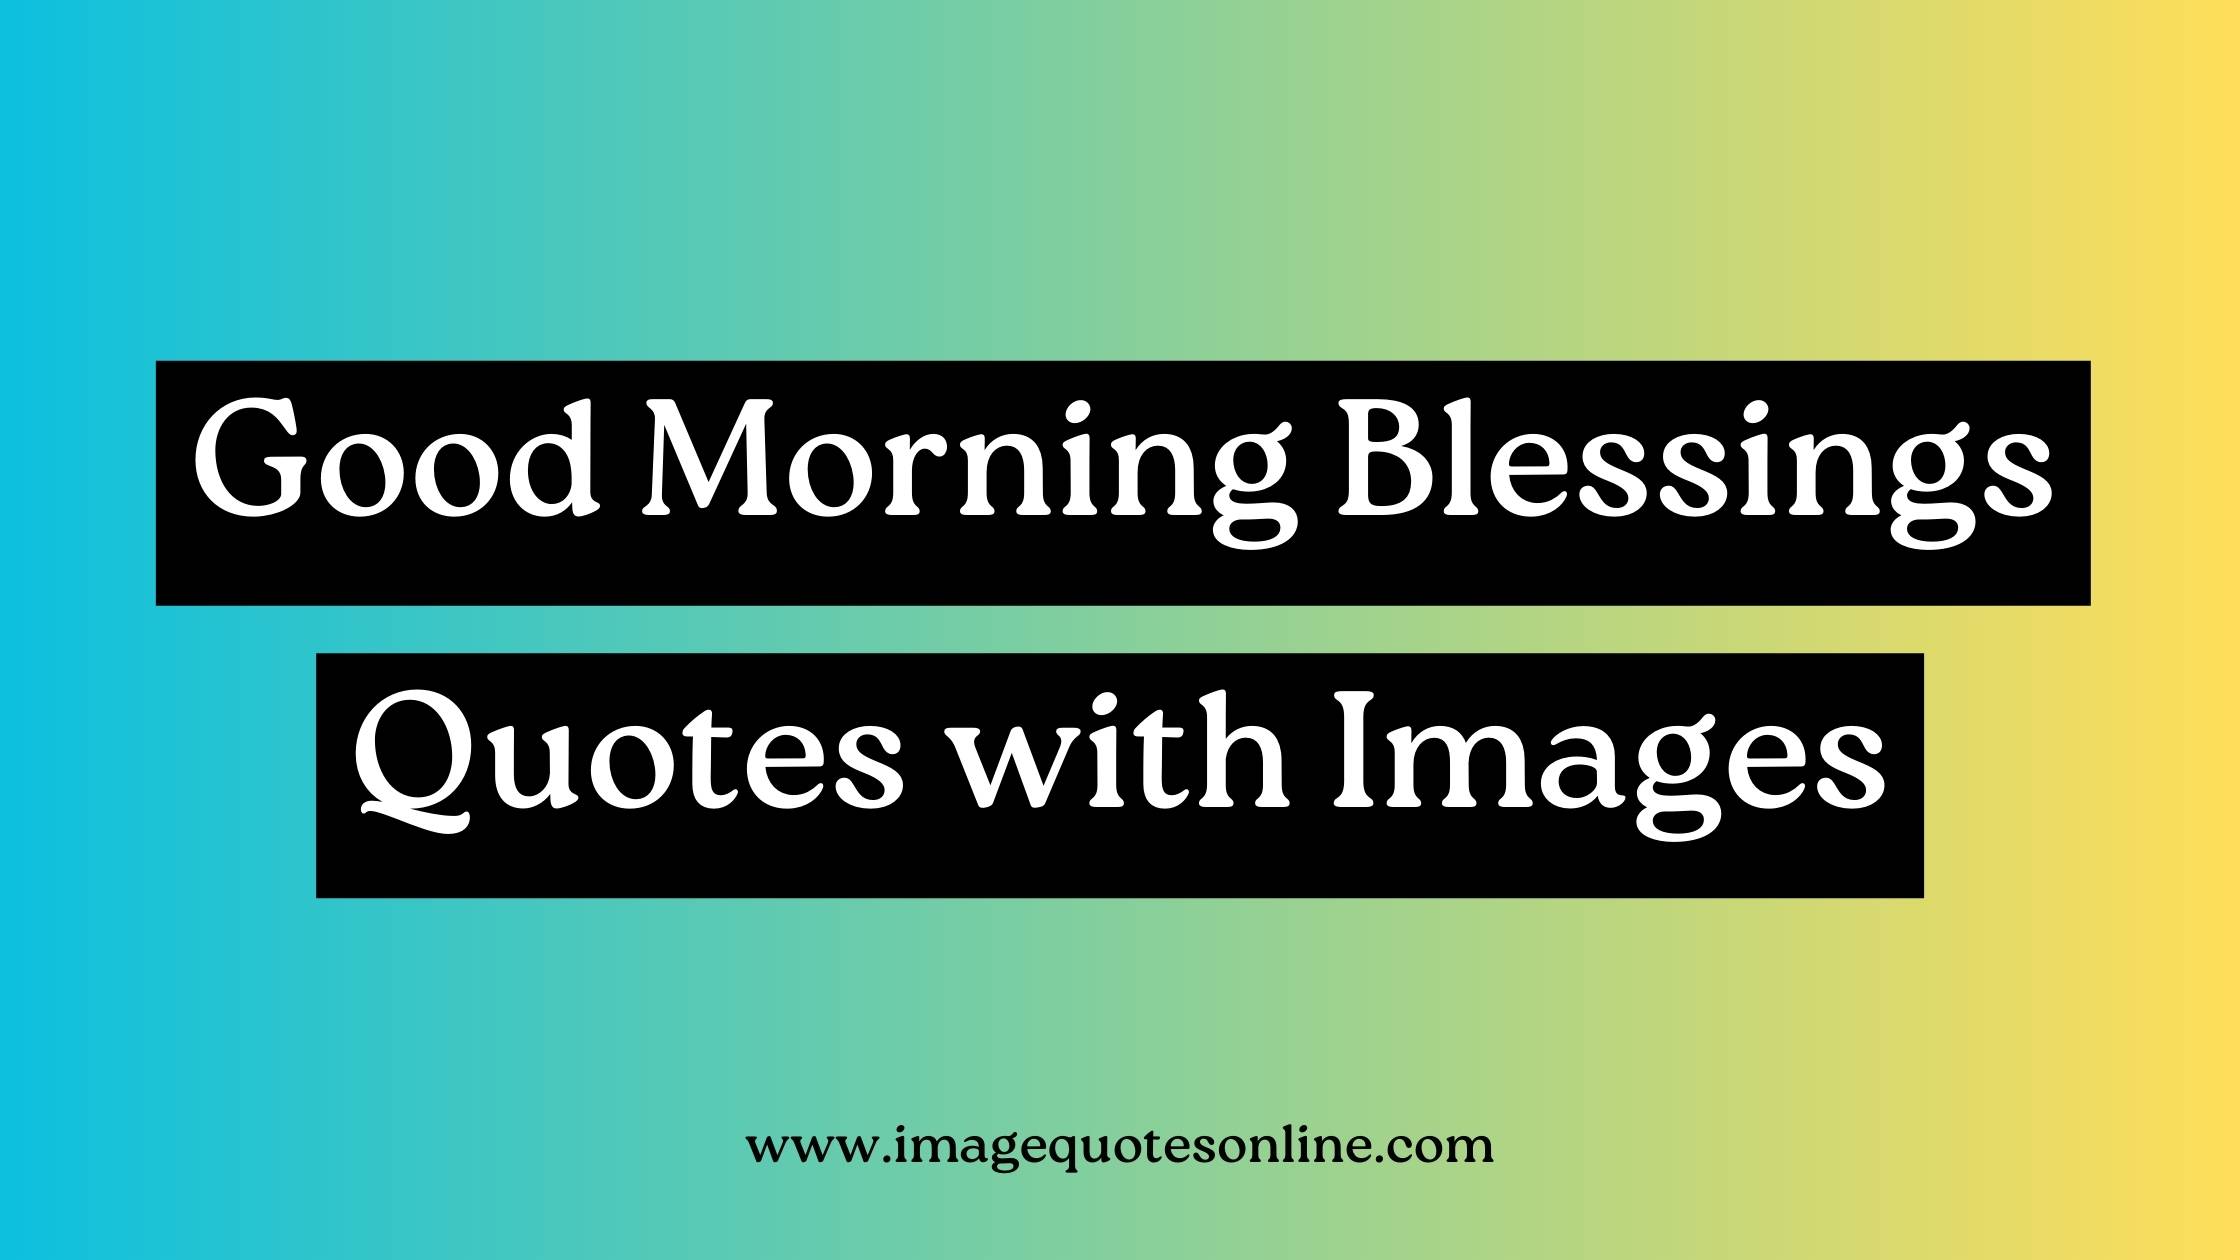 good morning blessings quotes and images